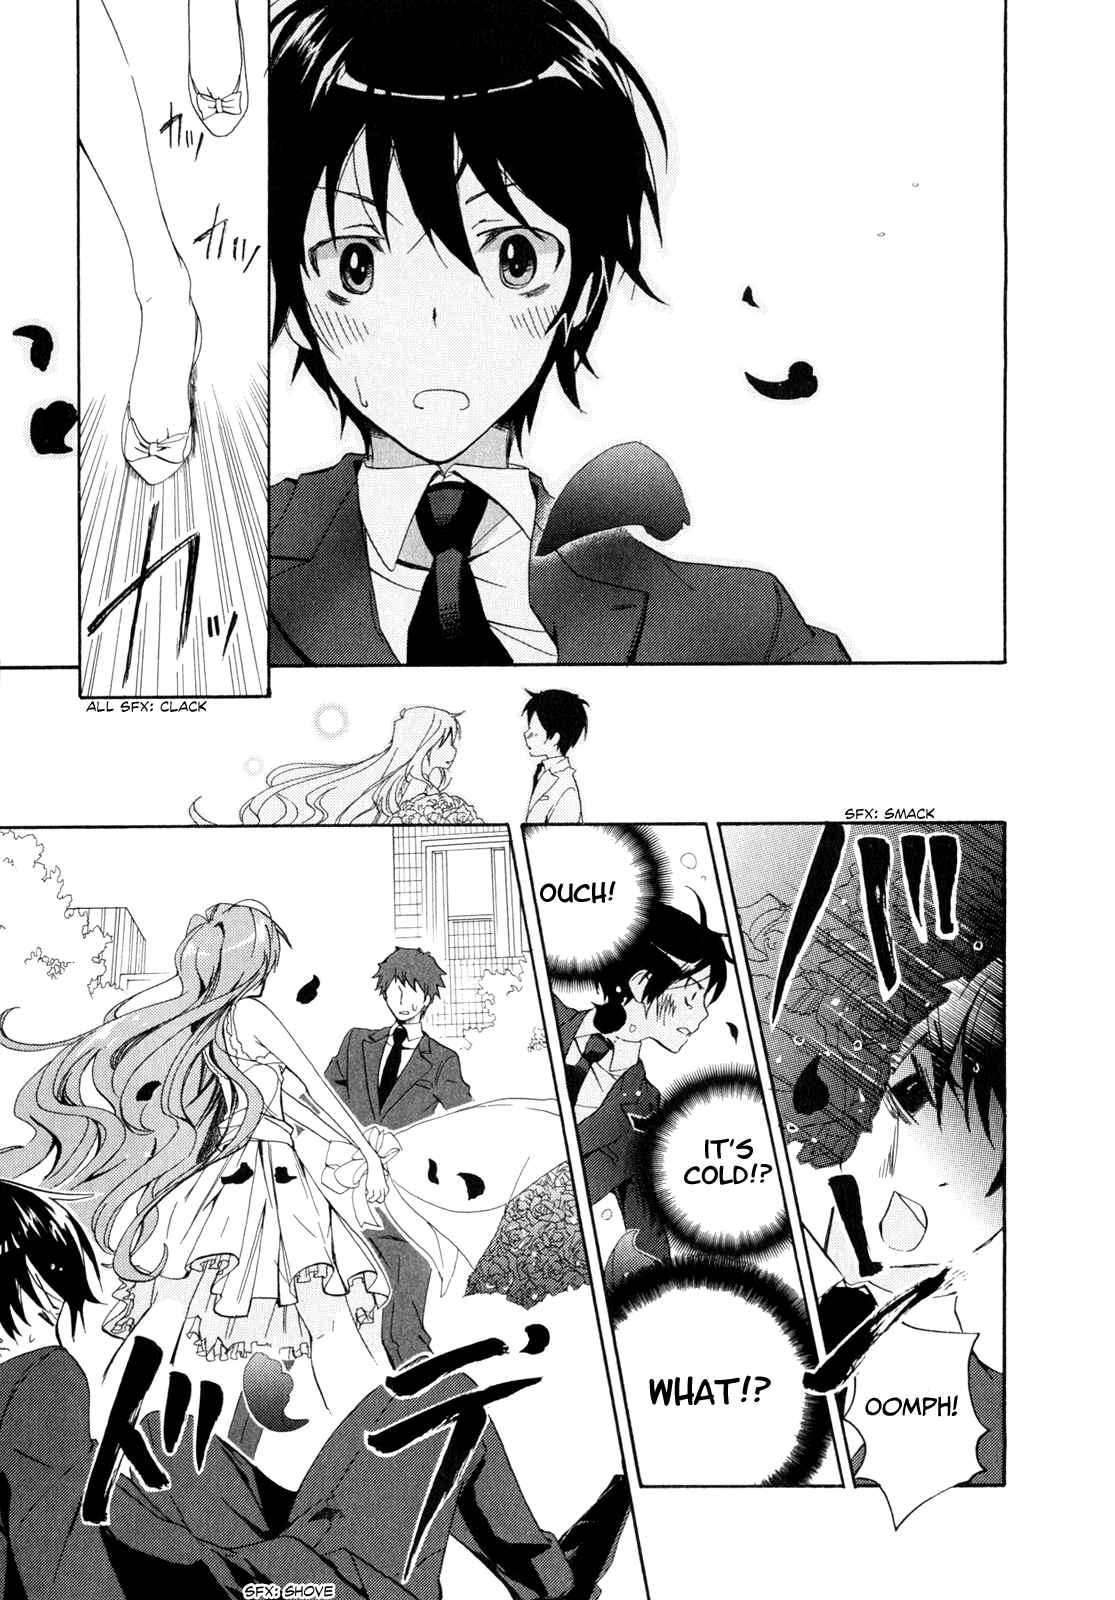 Golden Time Vol. 1 Ch. 1 In the Hand of Fate, Roses